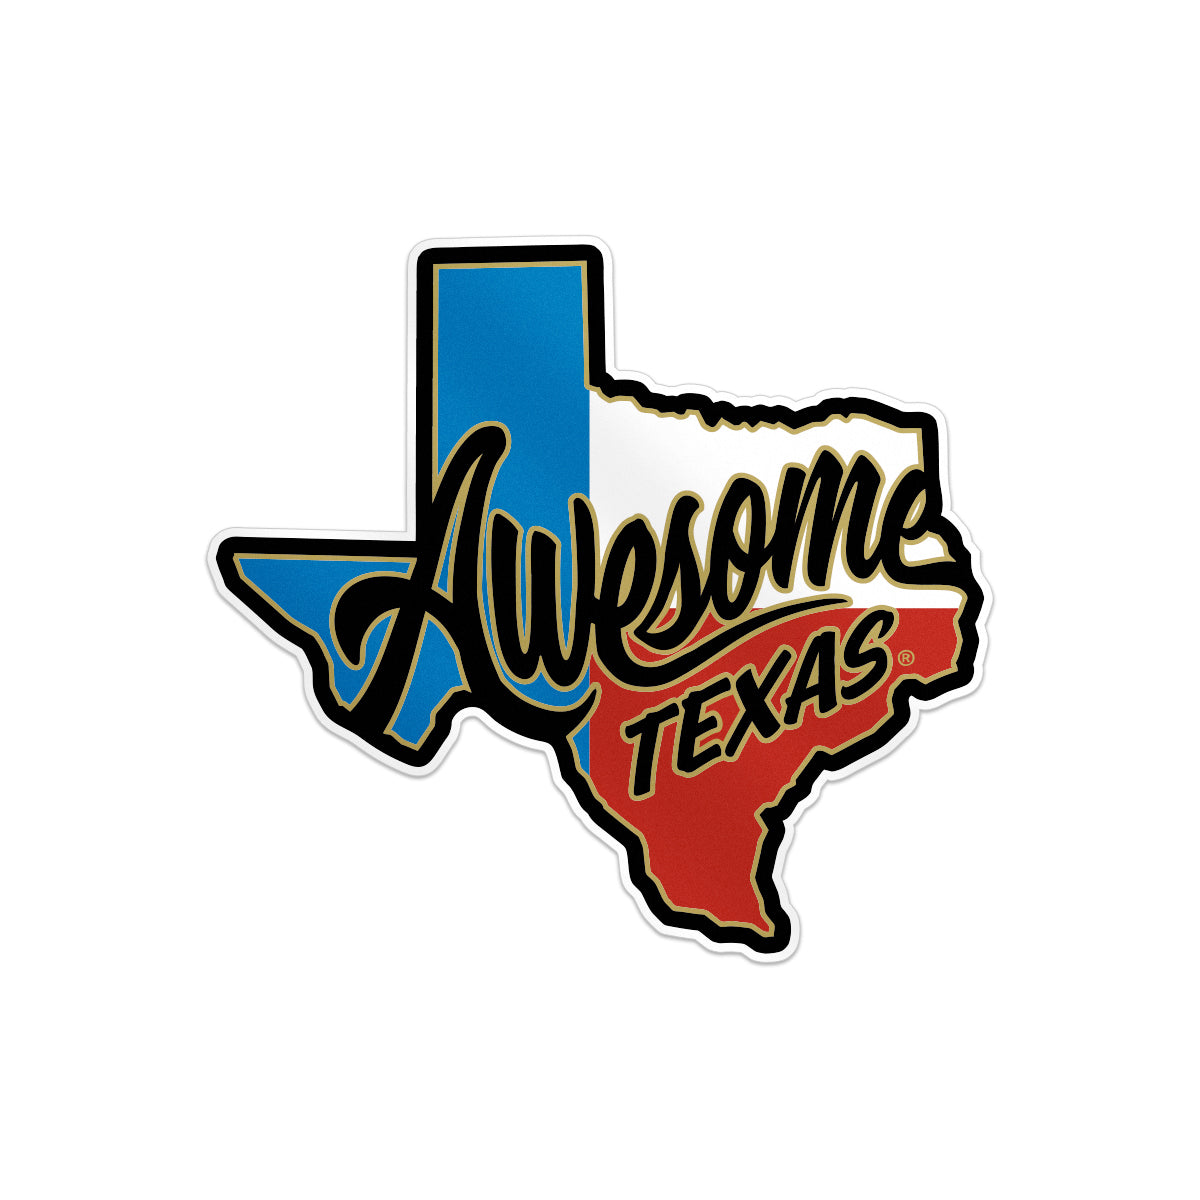 Awesome Texas® Sticker